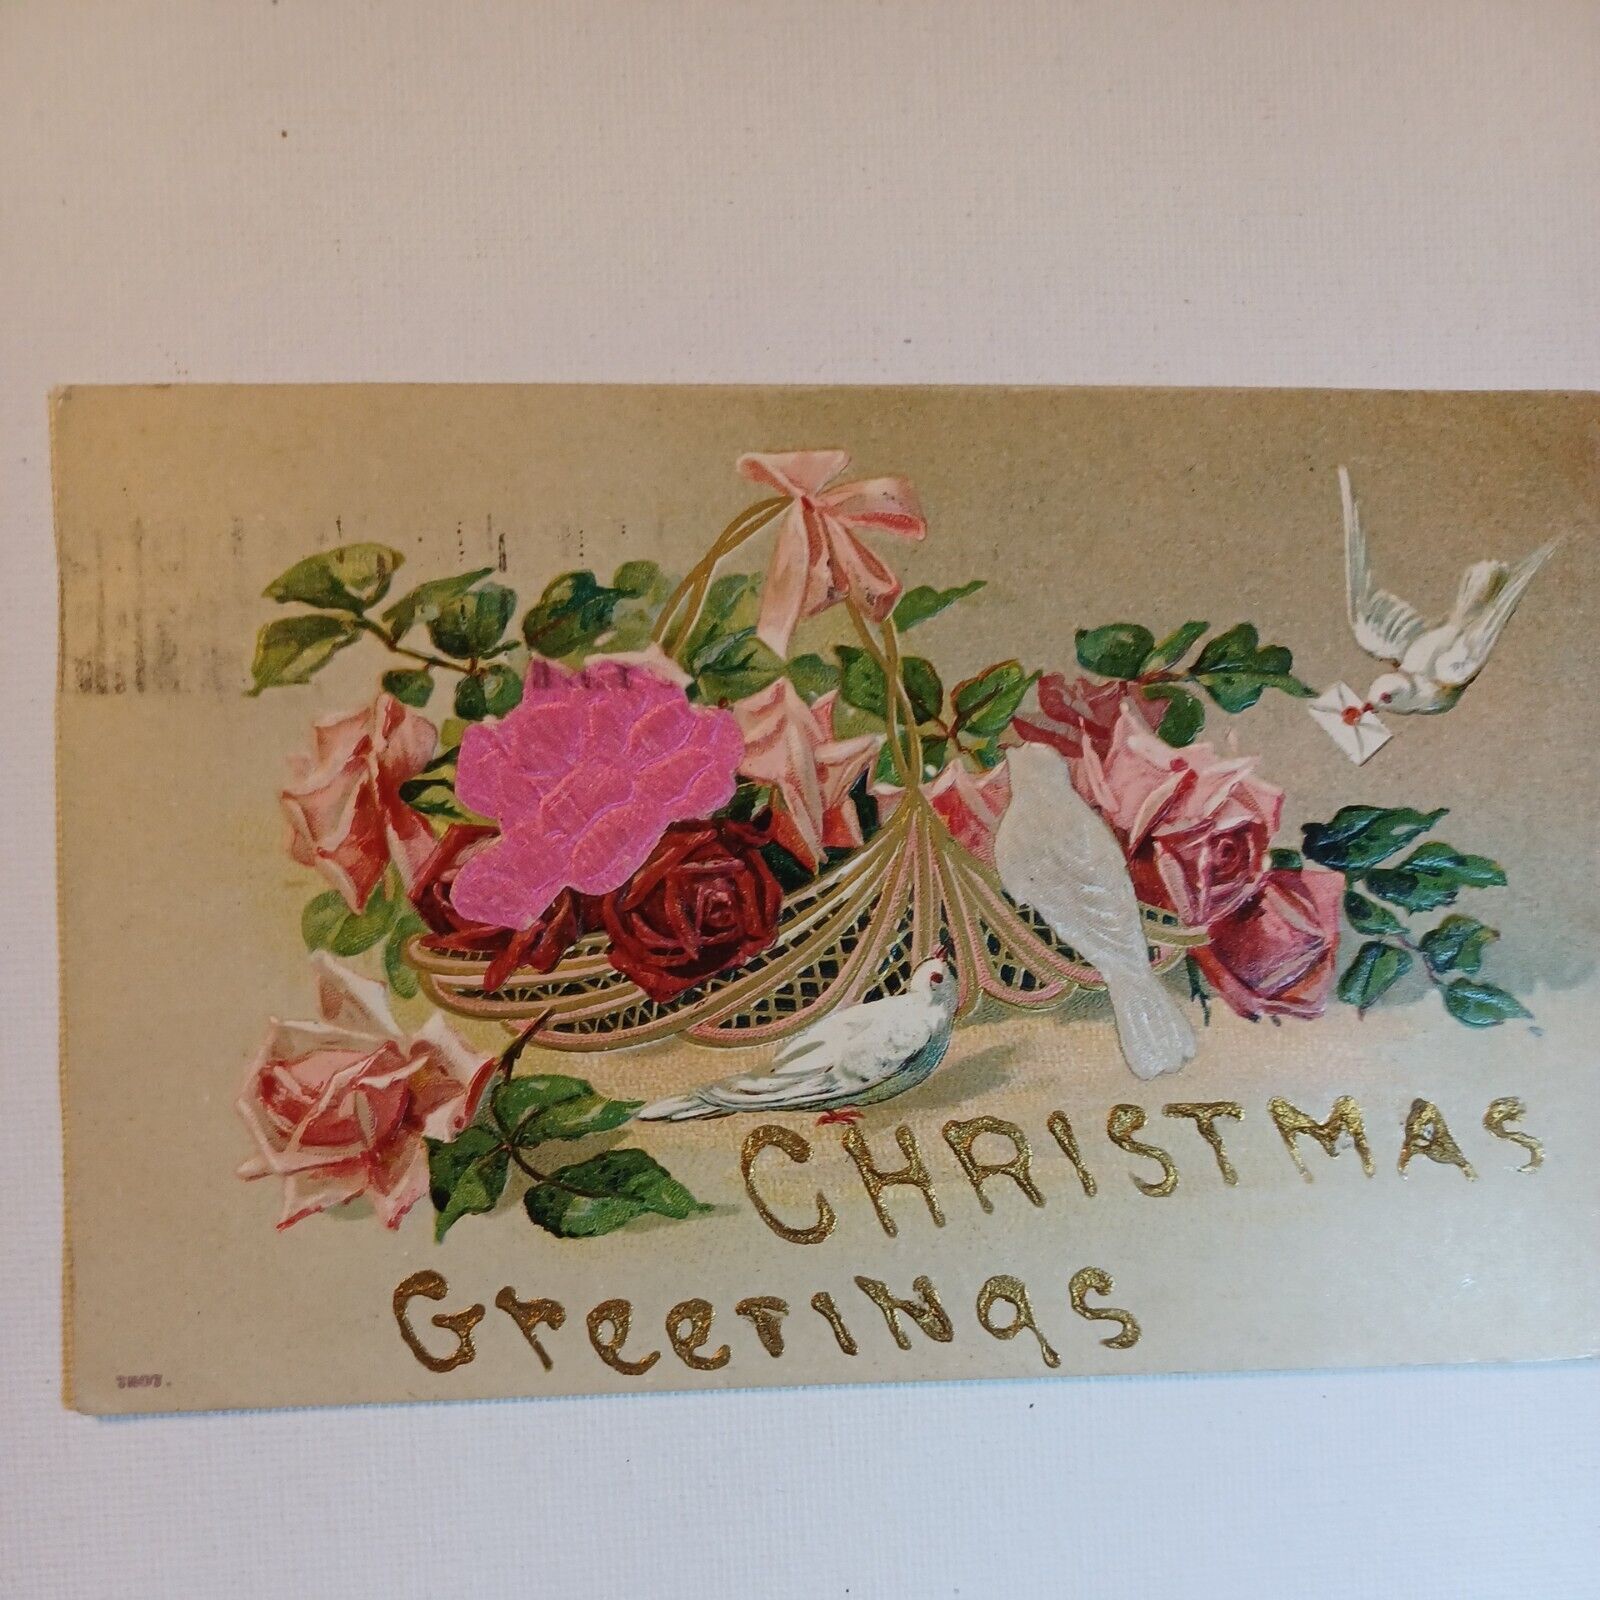 EARLY 1907 Christmas GREETINGS Hand GLITTERED EMBOSSED FLOWERS Doves Franklin 